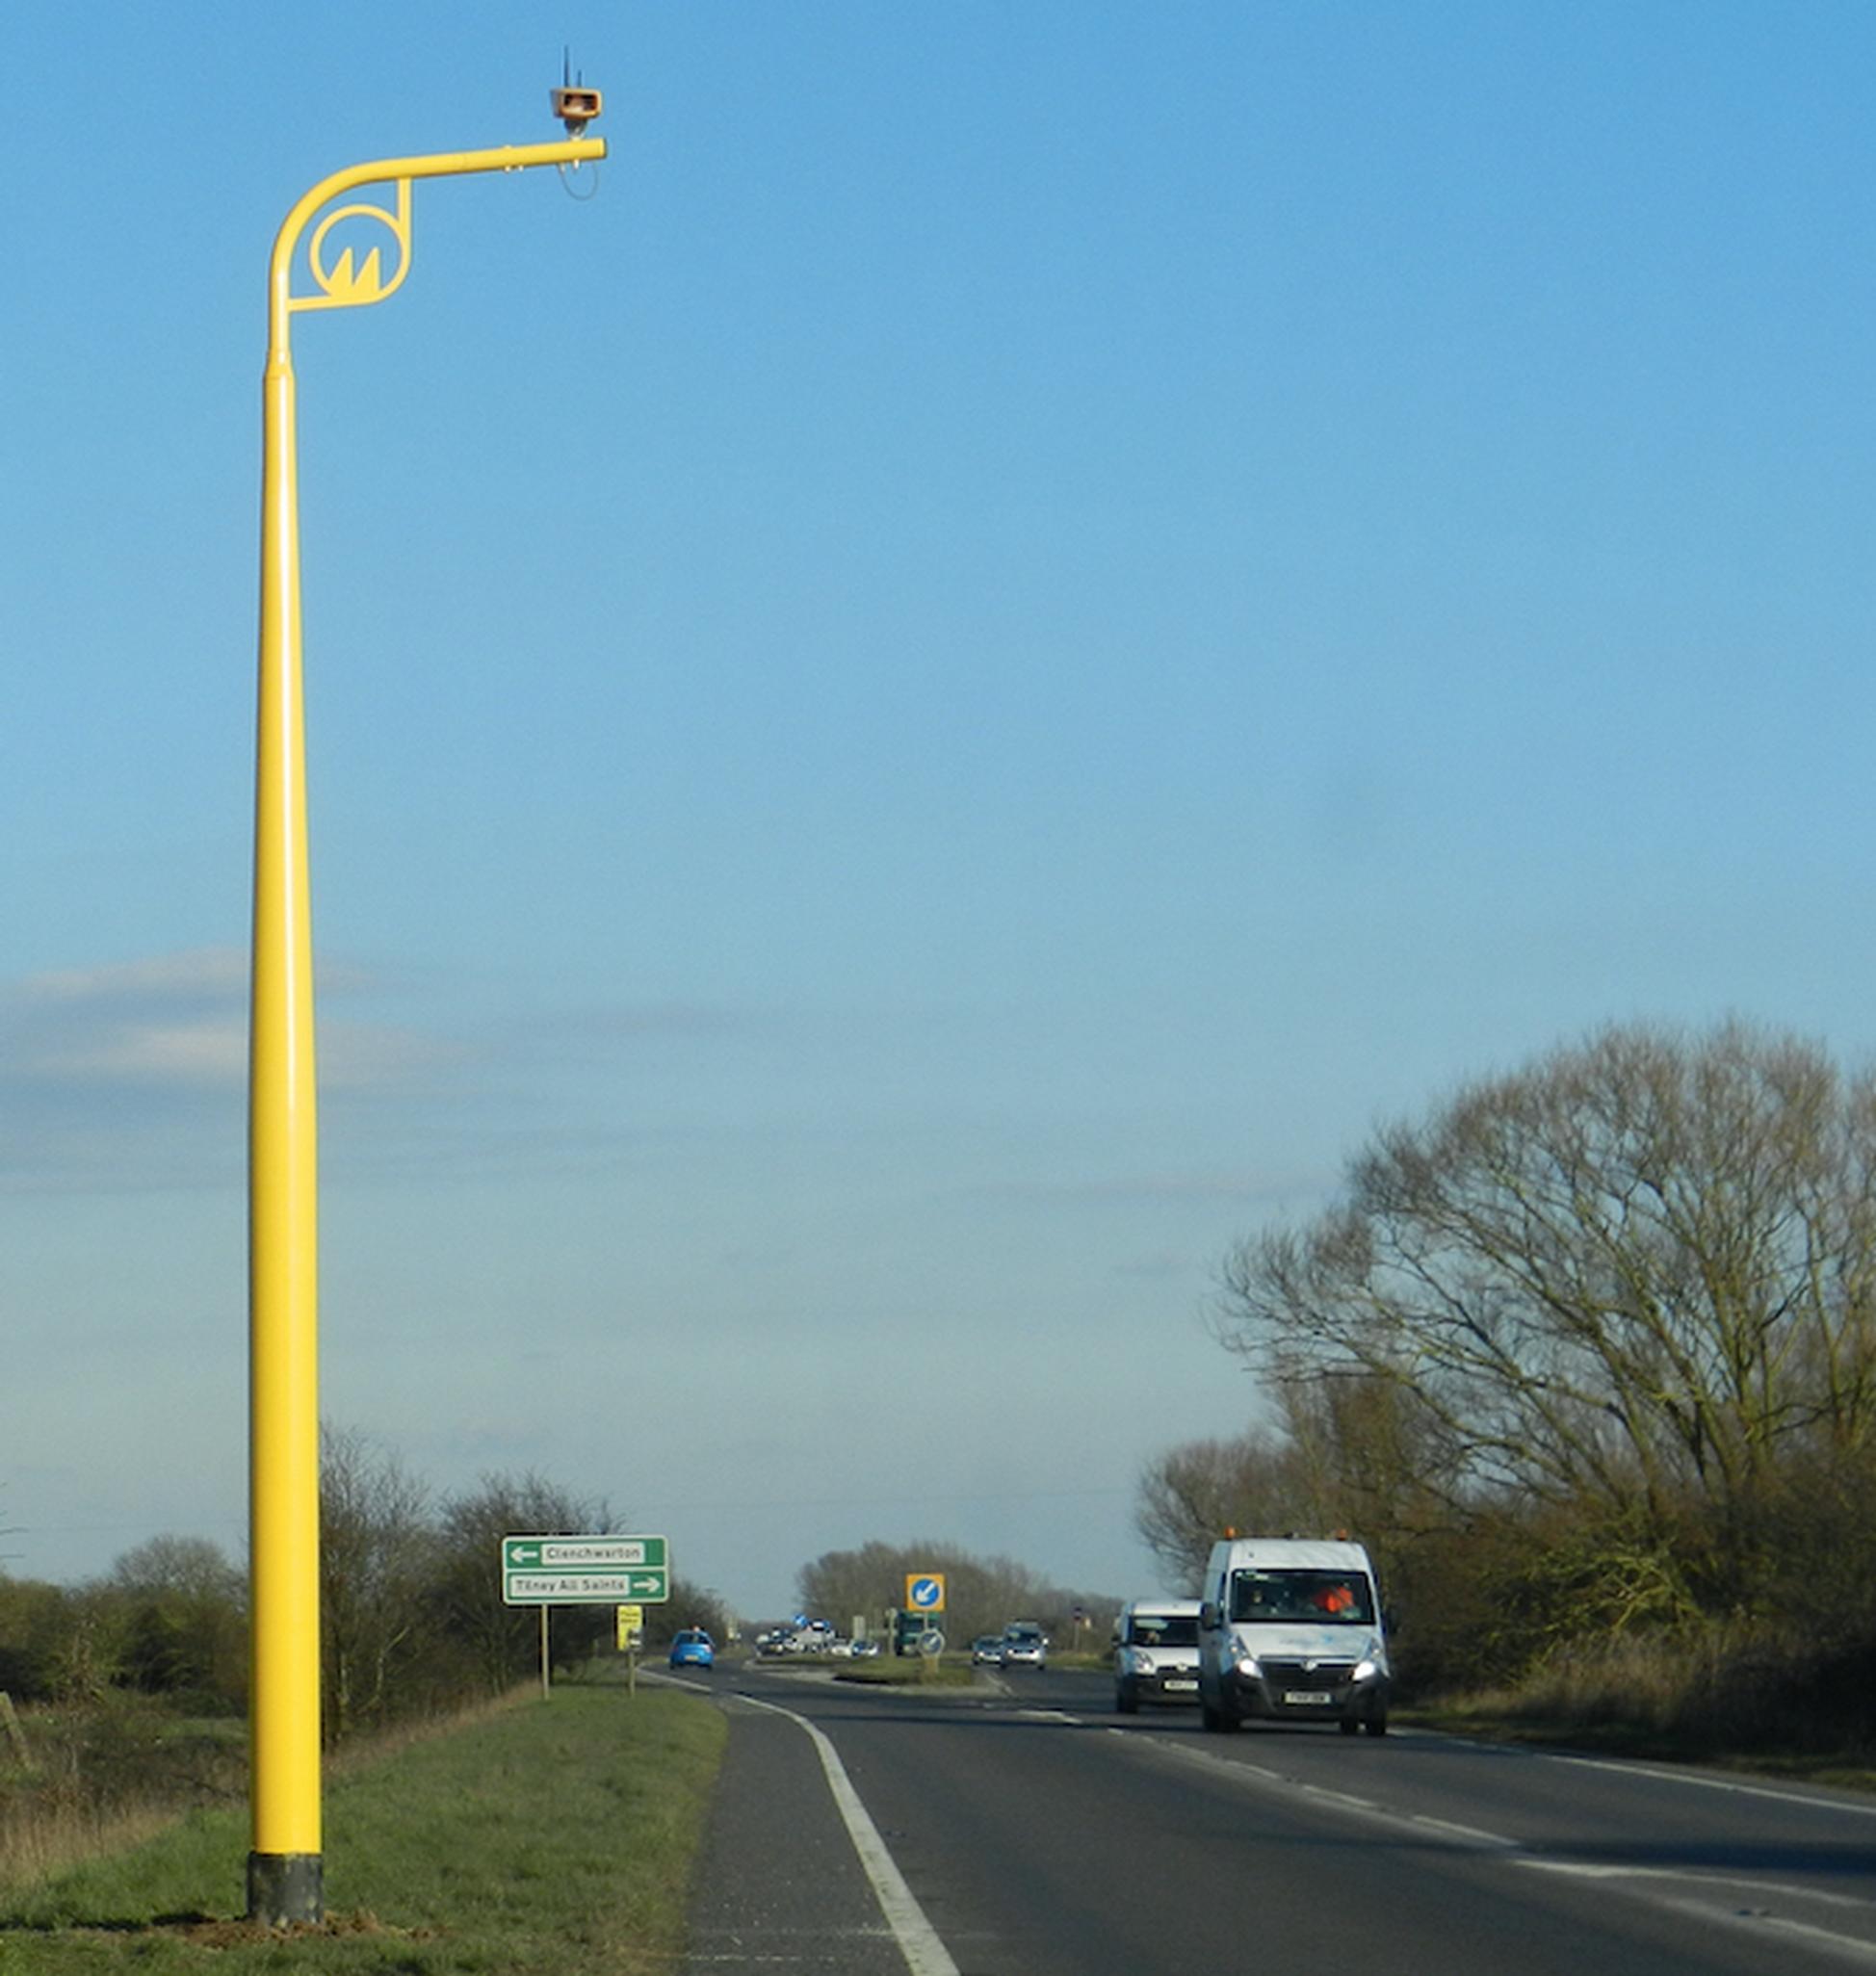 Lancashire to get SPECS3 Vector average speed cameras, which are housed in high masts above the road